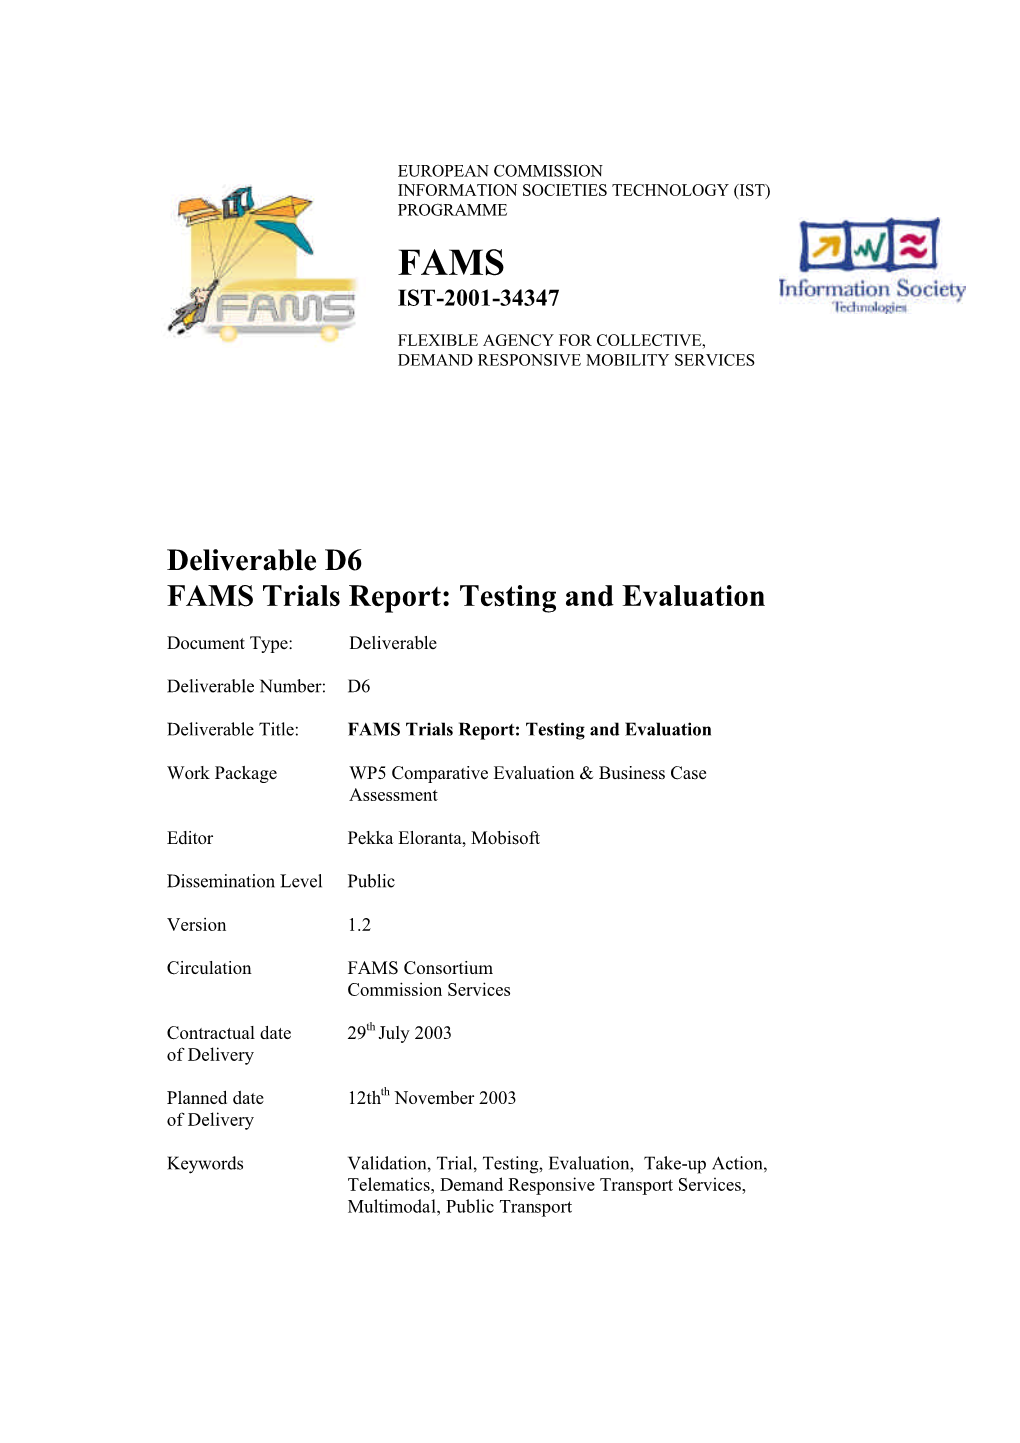 Deliverable D6 FAMS Trials Report: Testing and Evaluation